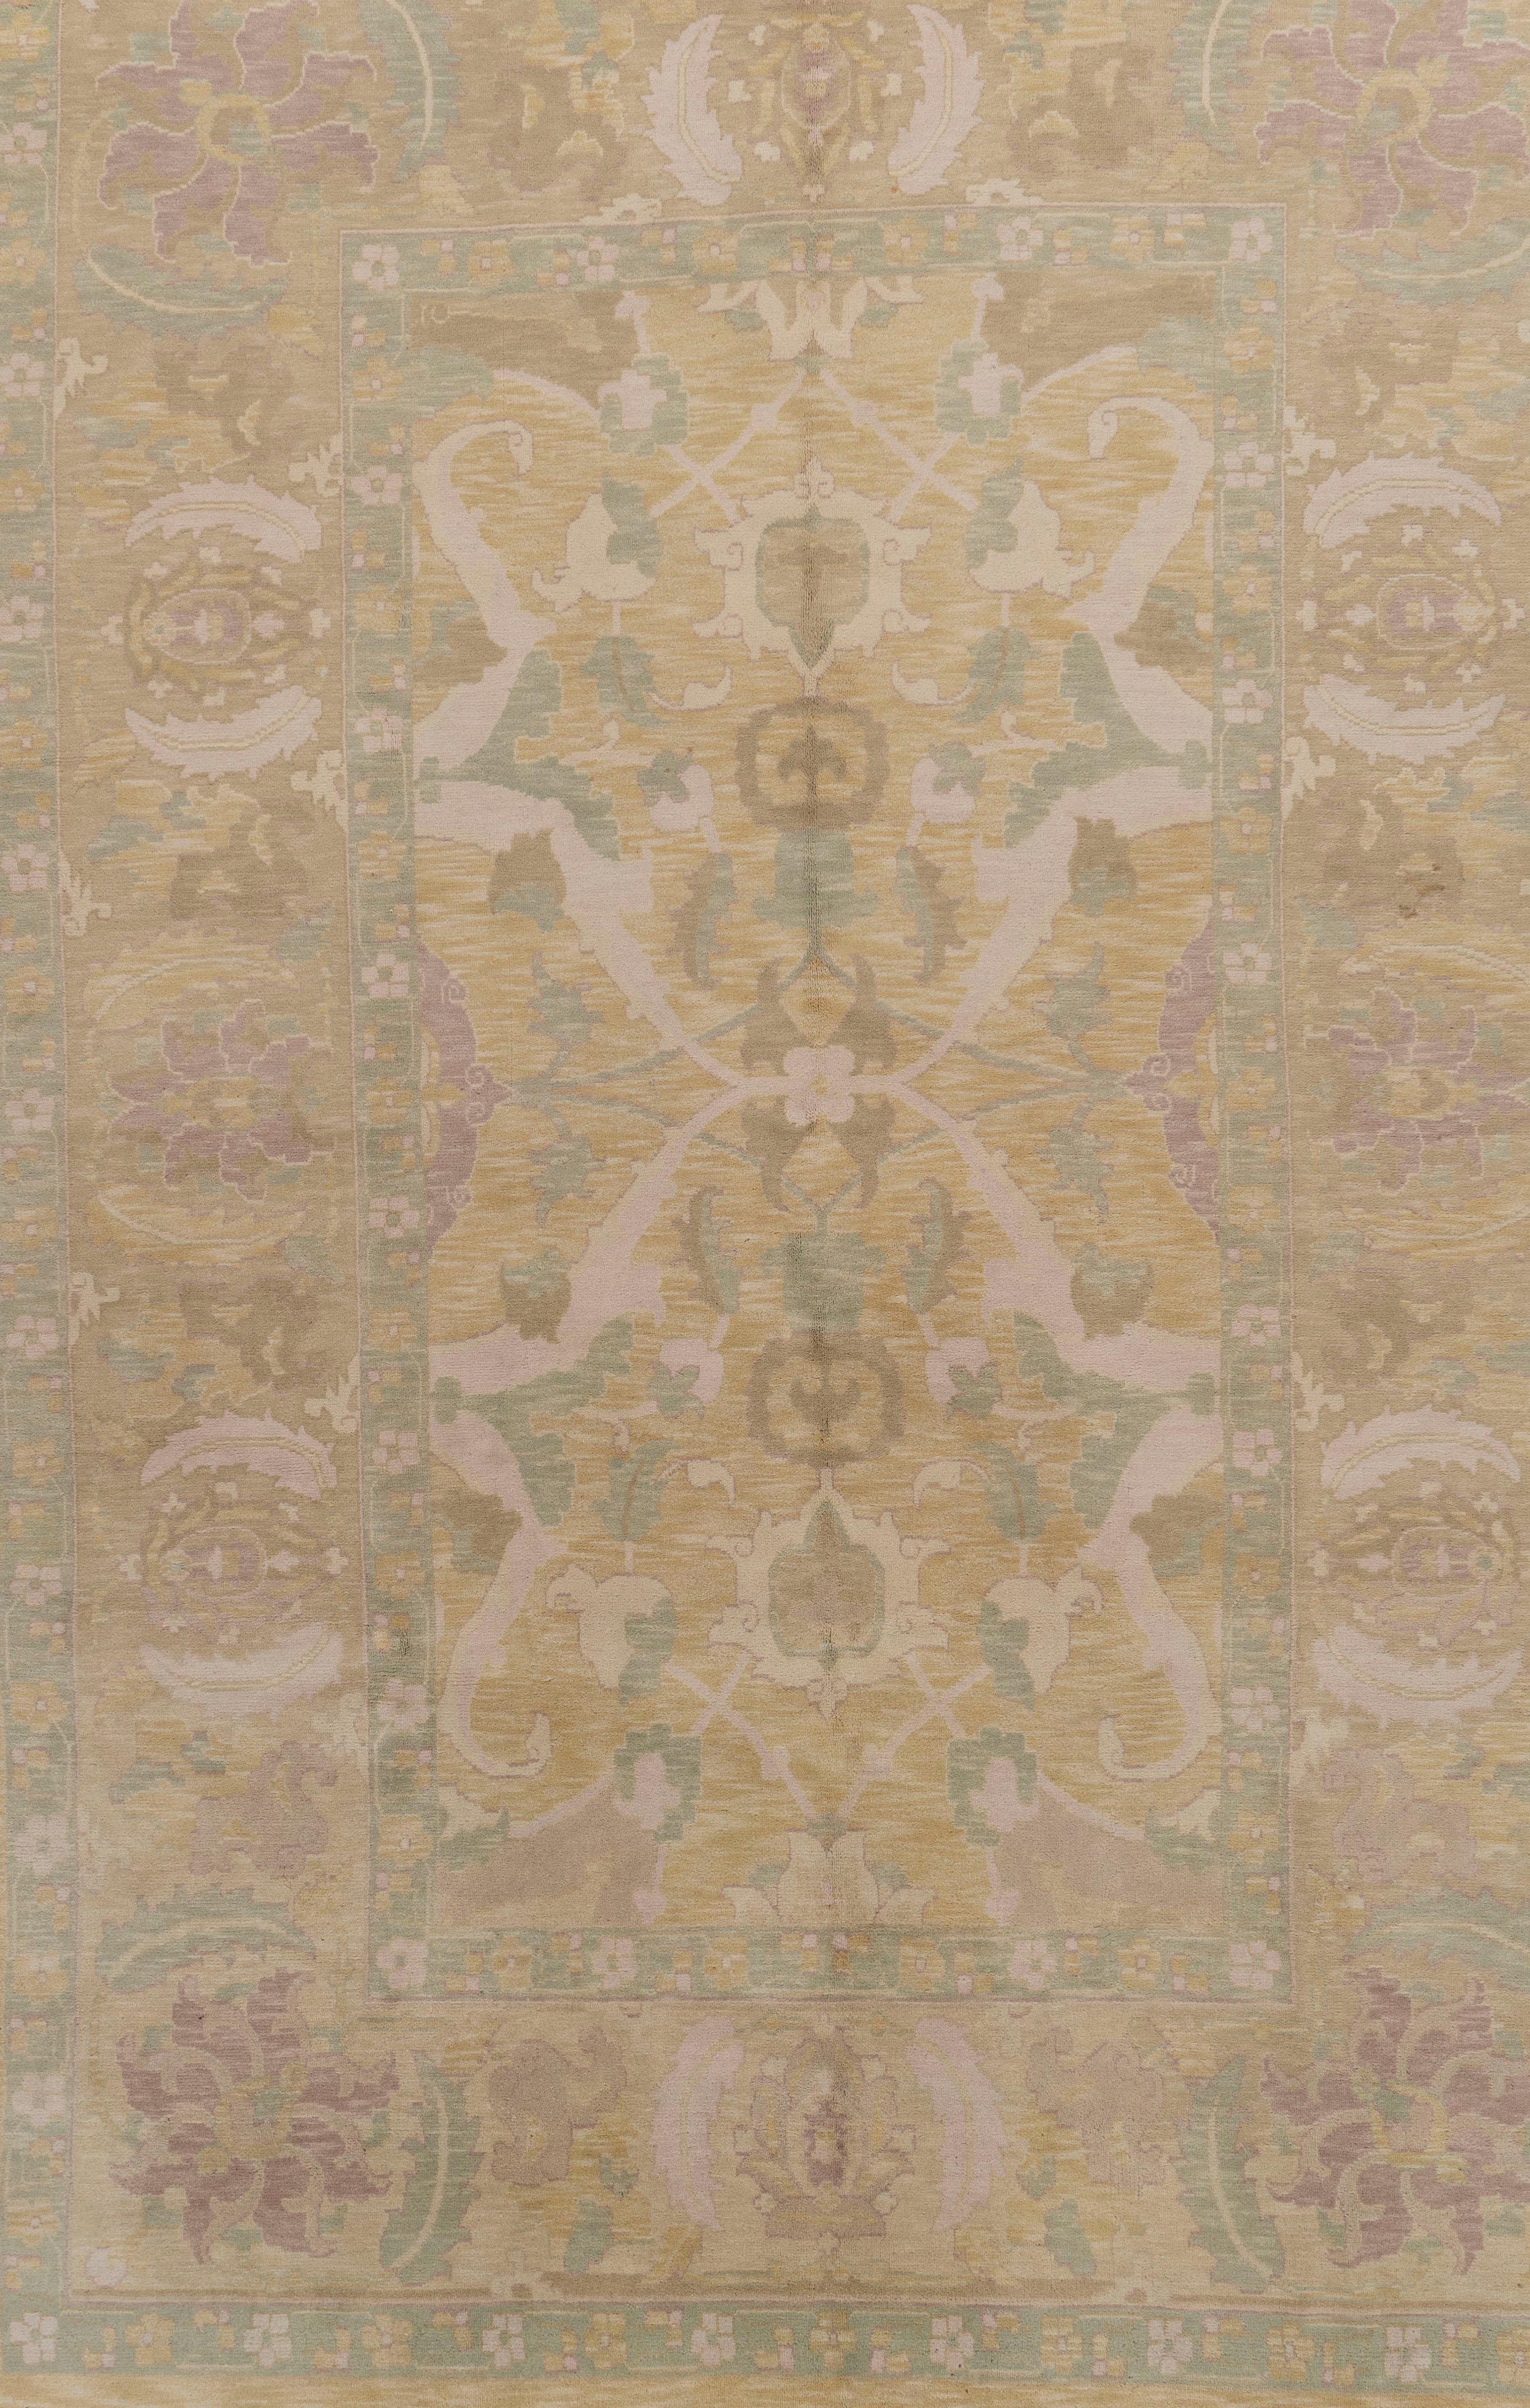 Agra Design Rug 6'4 x 9'9 In Good Condition For Sale In New York, NY